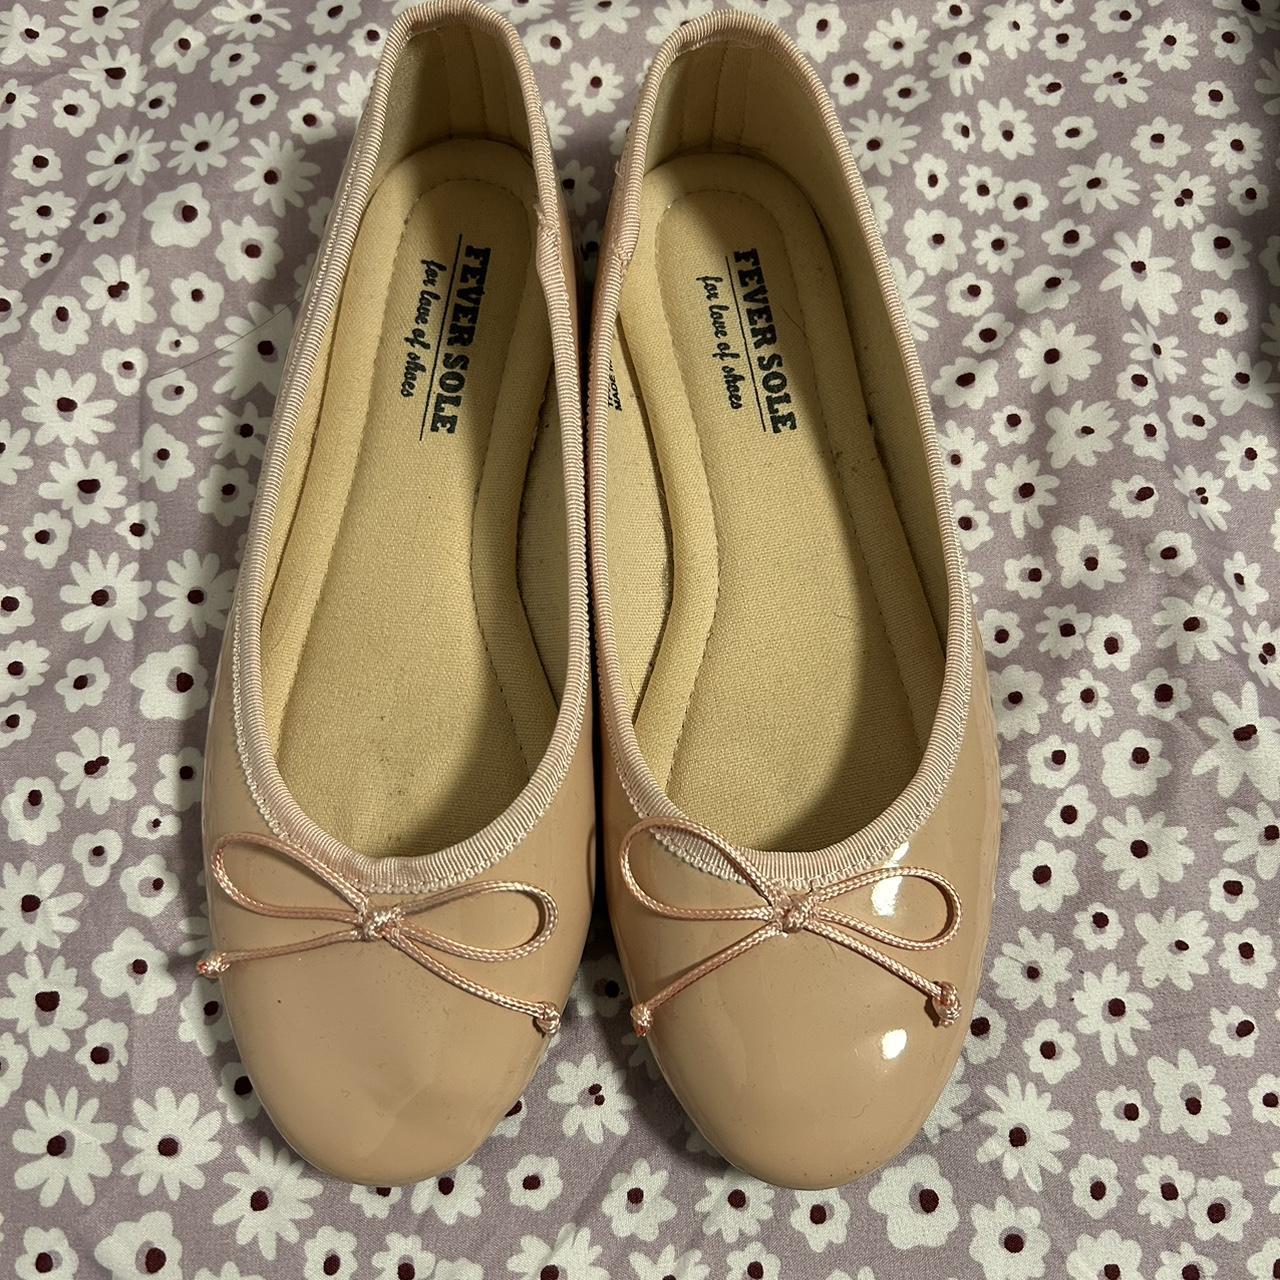 Feversole ballet flats in size 6.5 super cute and... - Depop